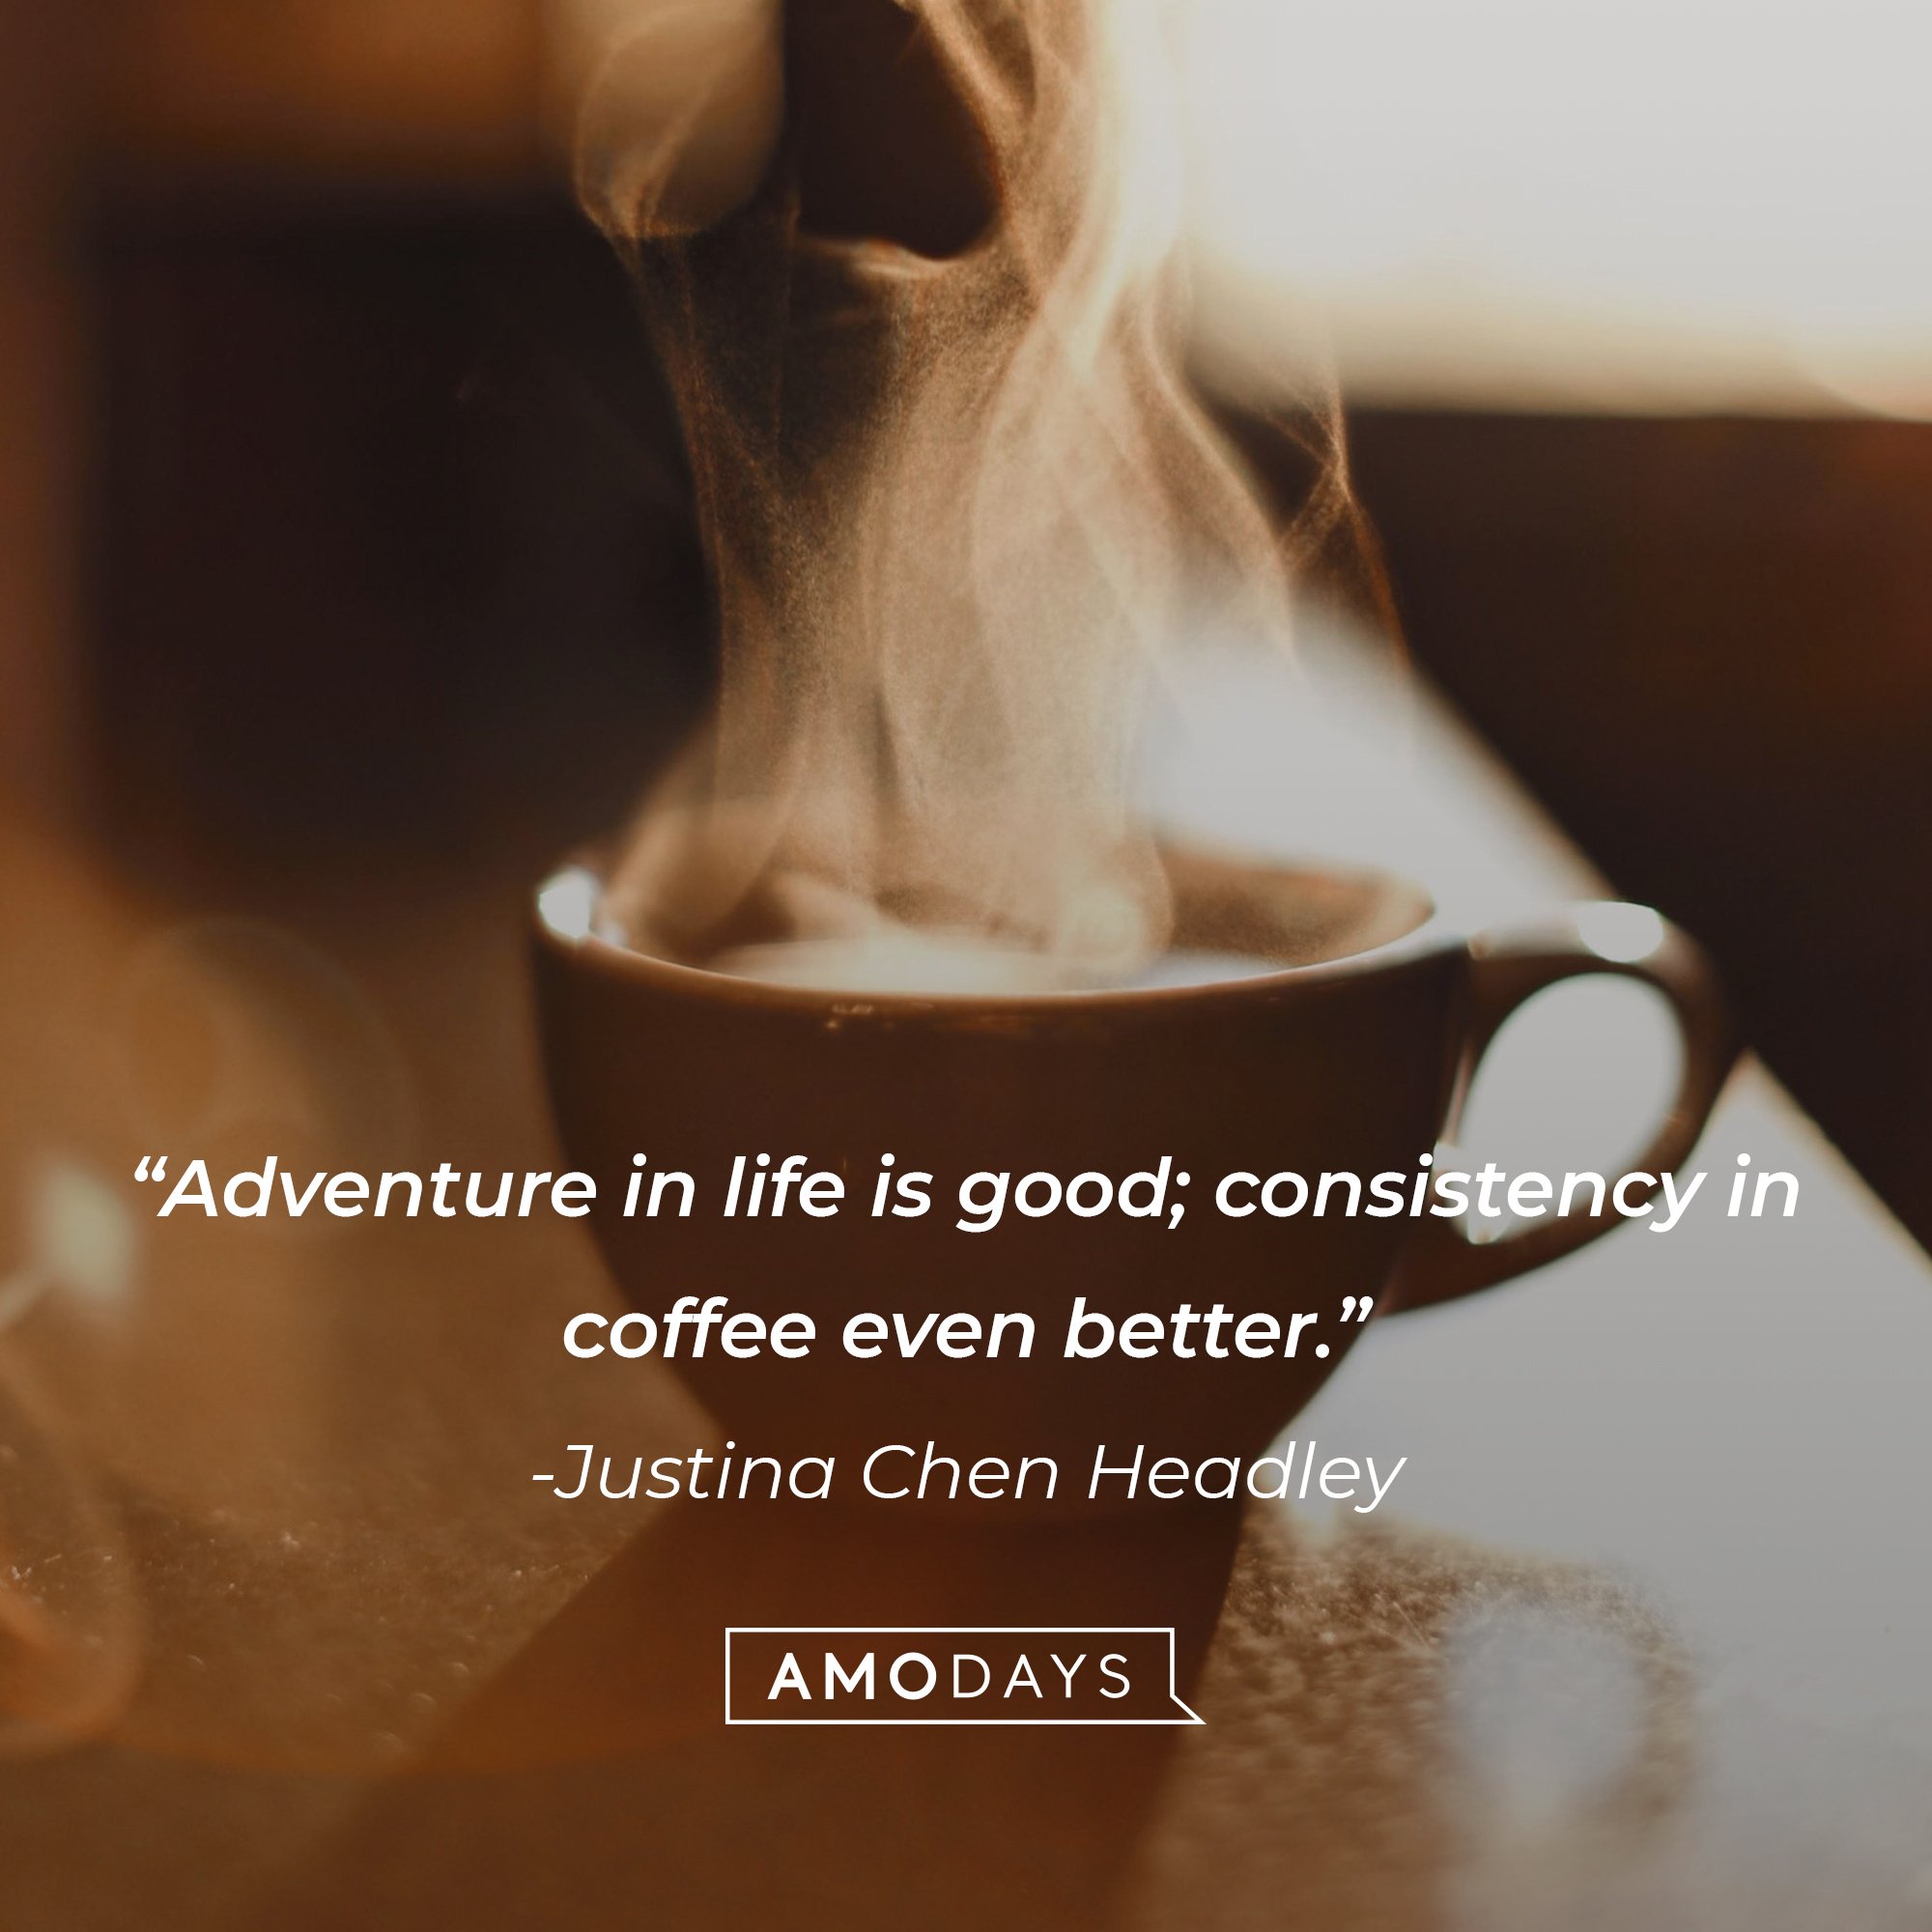 Justina Chen Headley's quote: "Adventure in life is good; consistency in coffee even better." | Image: AmoDays